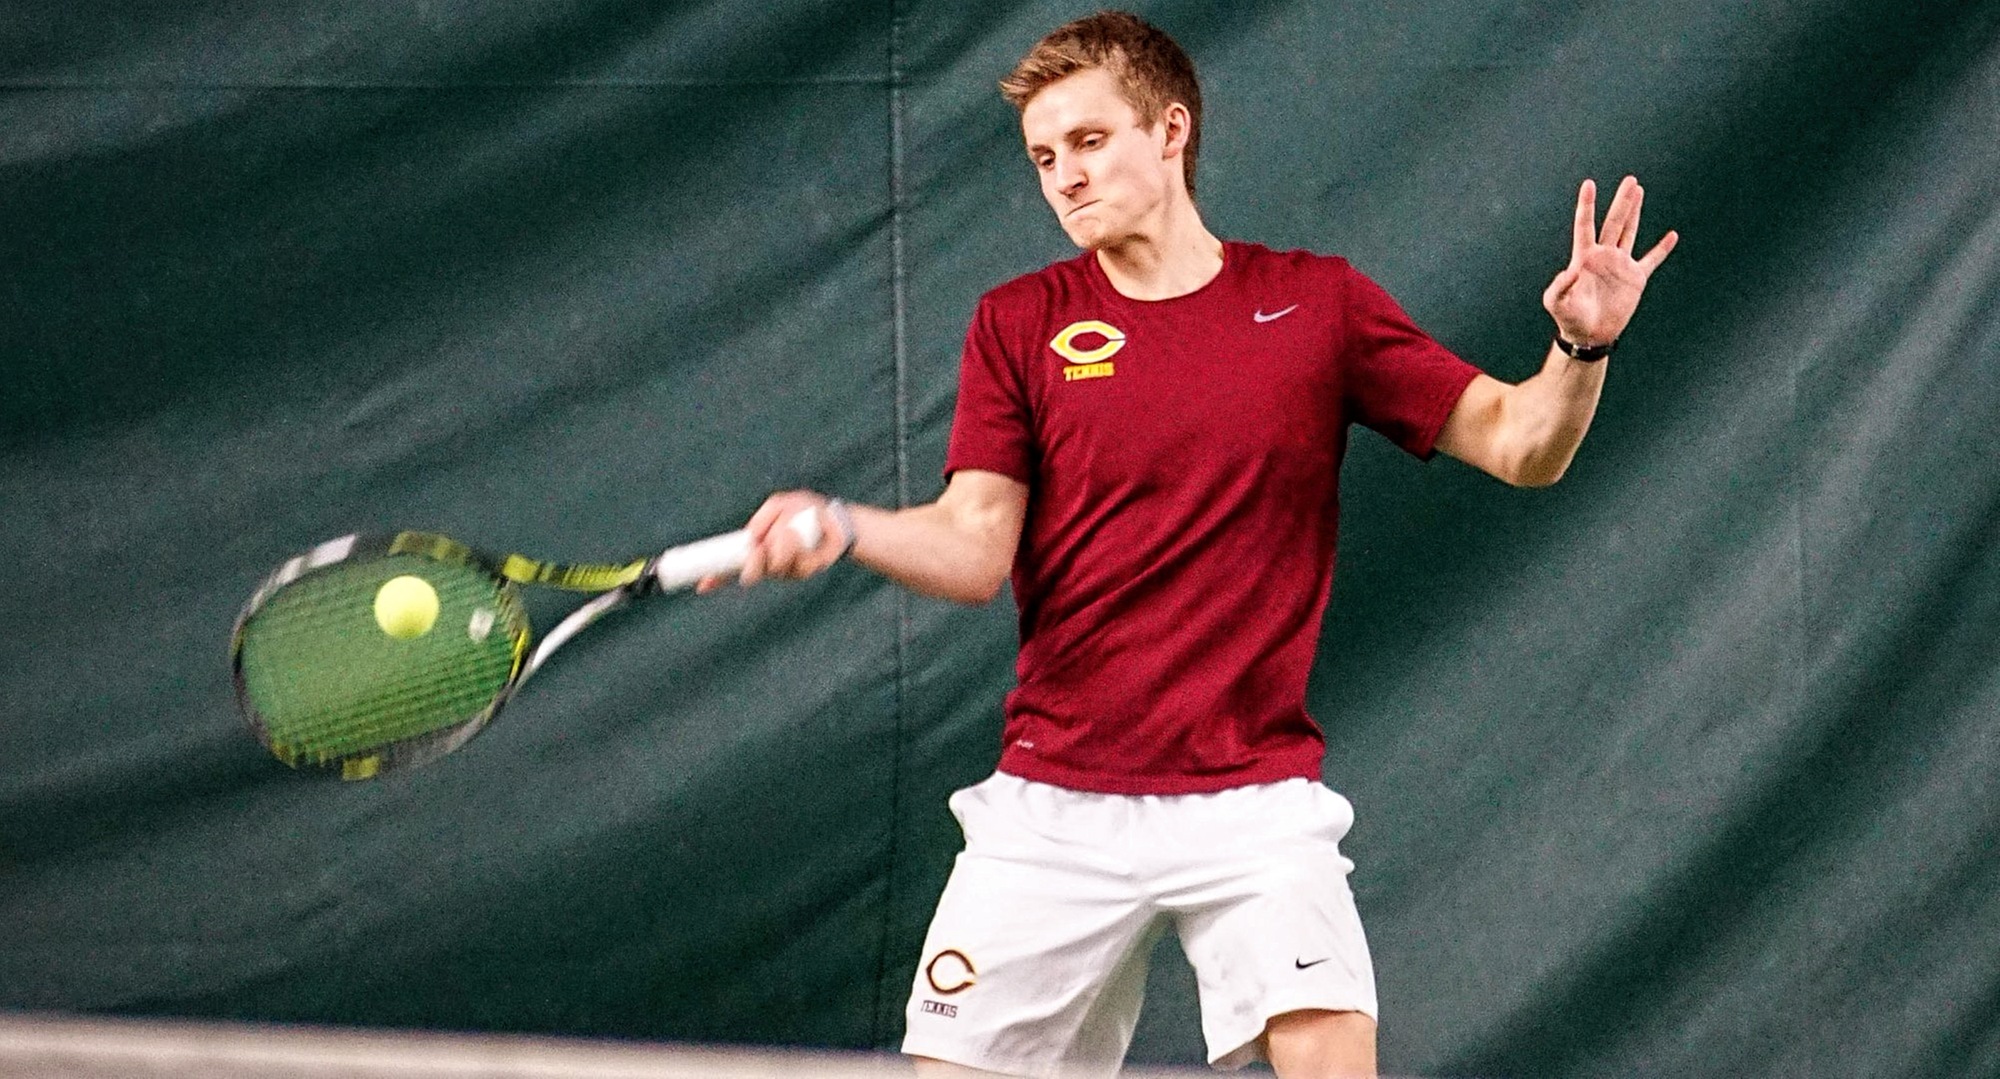 Senior Matthew Engum remained unbeaten in singles play as he posted a 6-2, 7-5 against Augustana (Photo courtesy of Lyle Hovland)